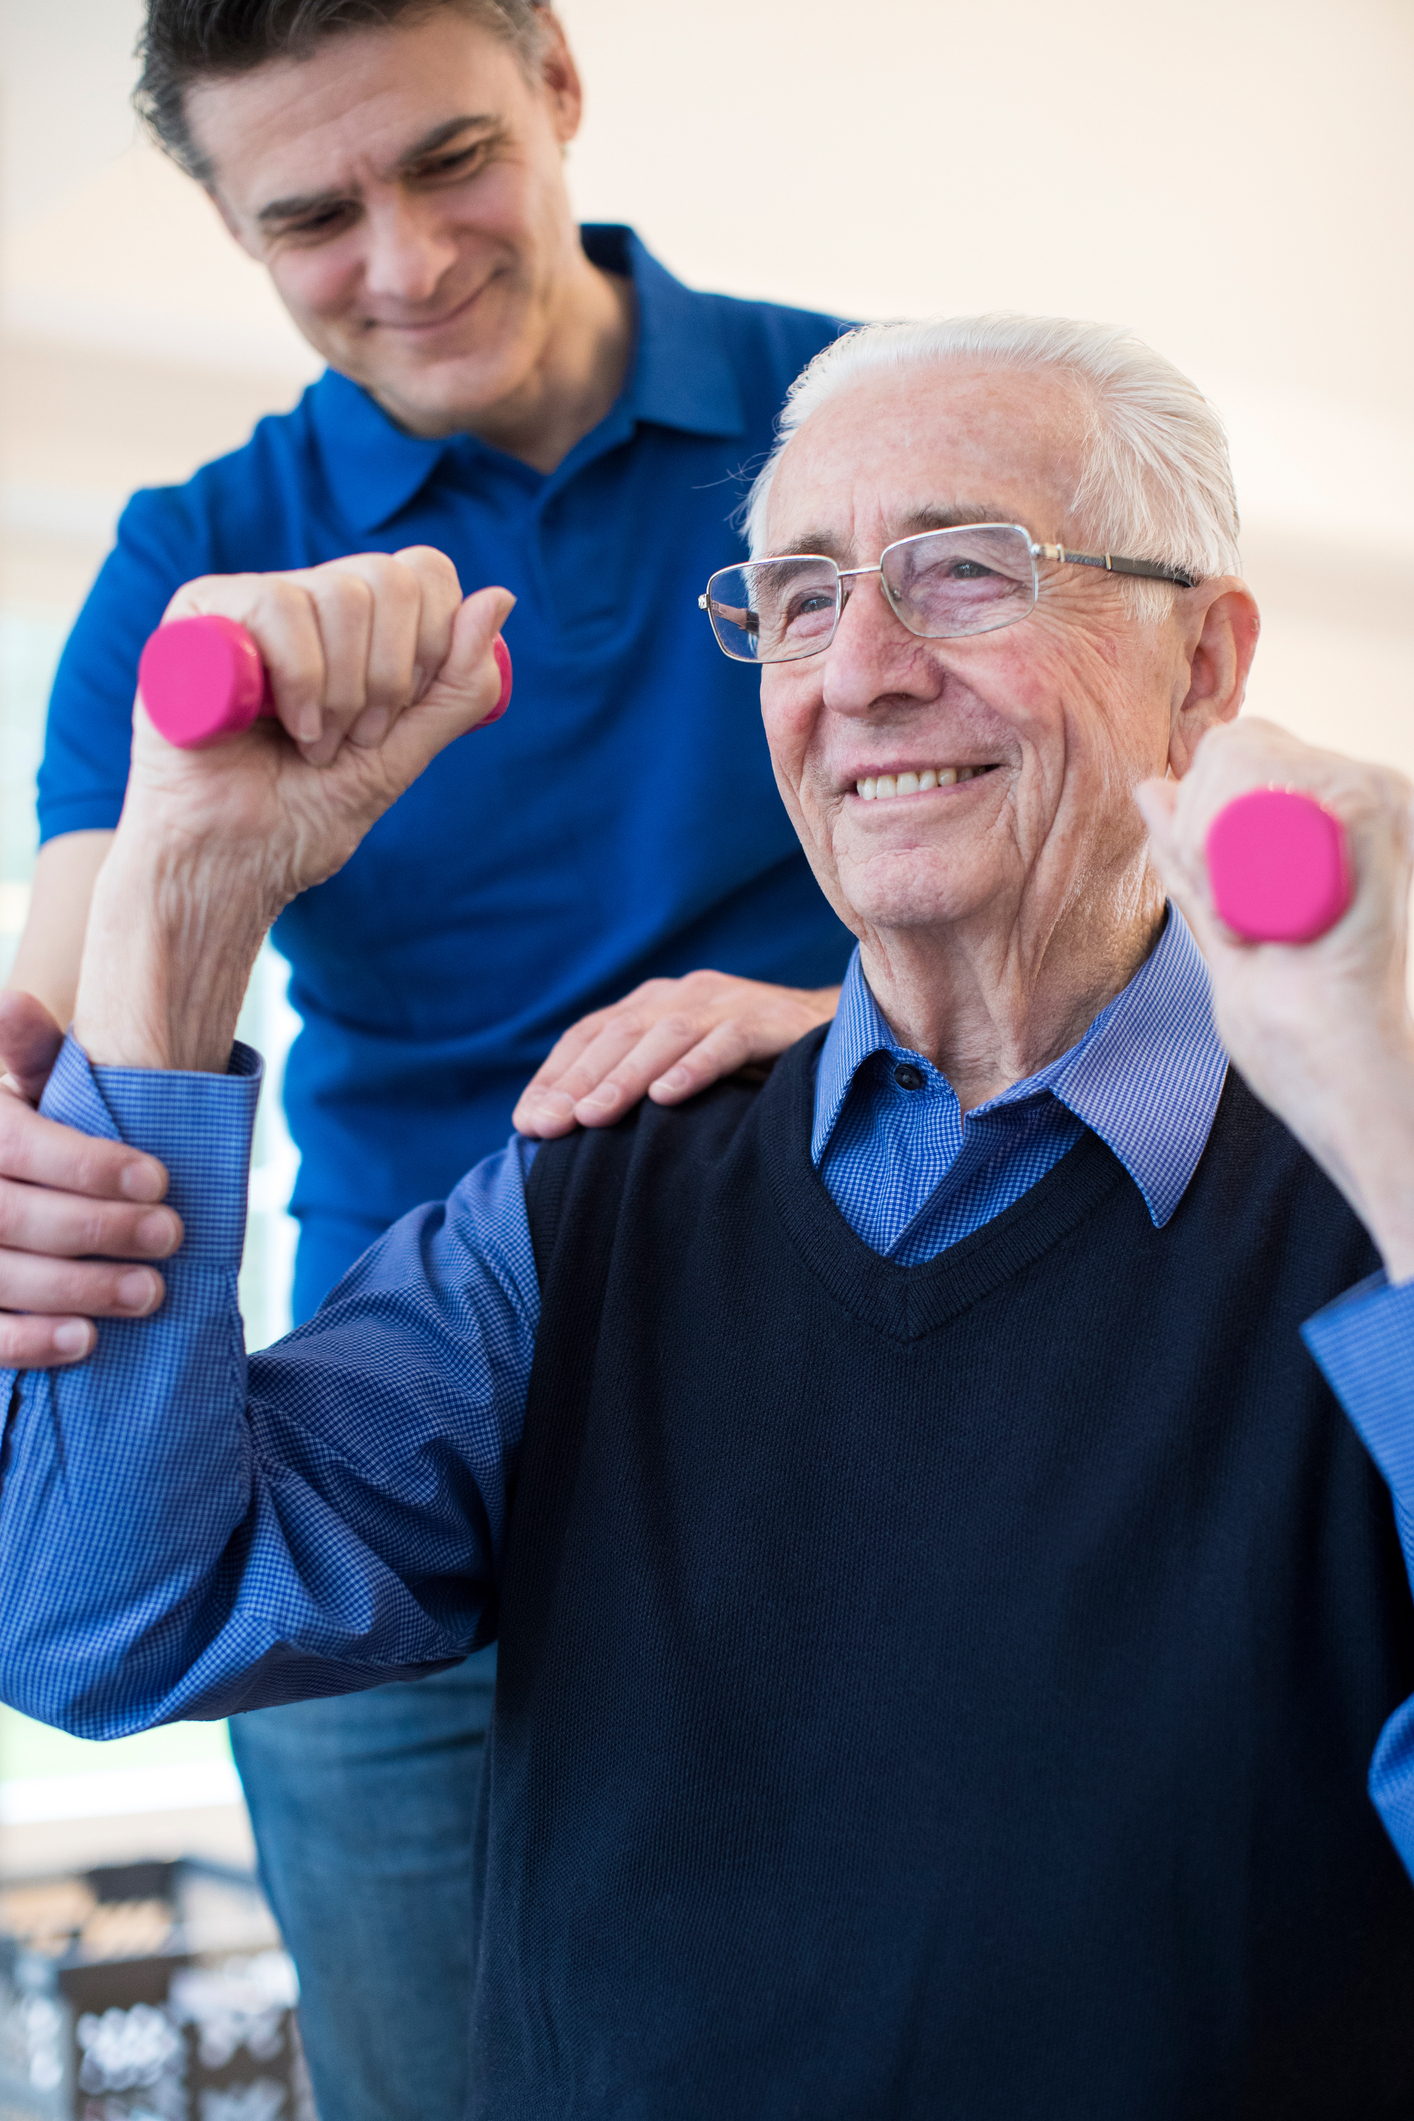 Physiotherapist Helping Senior Man To Lift Hand Weights